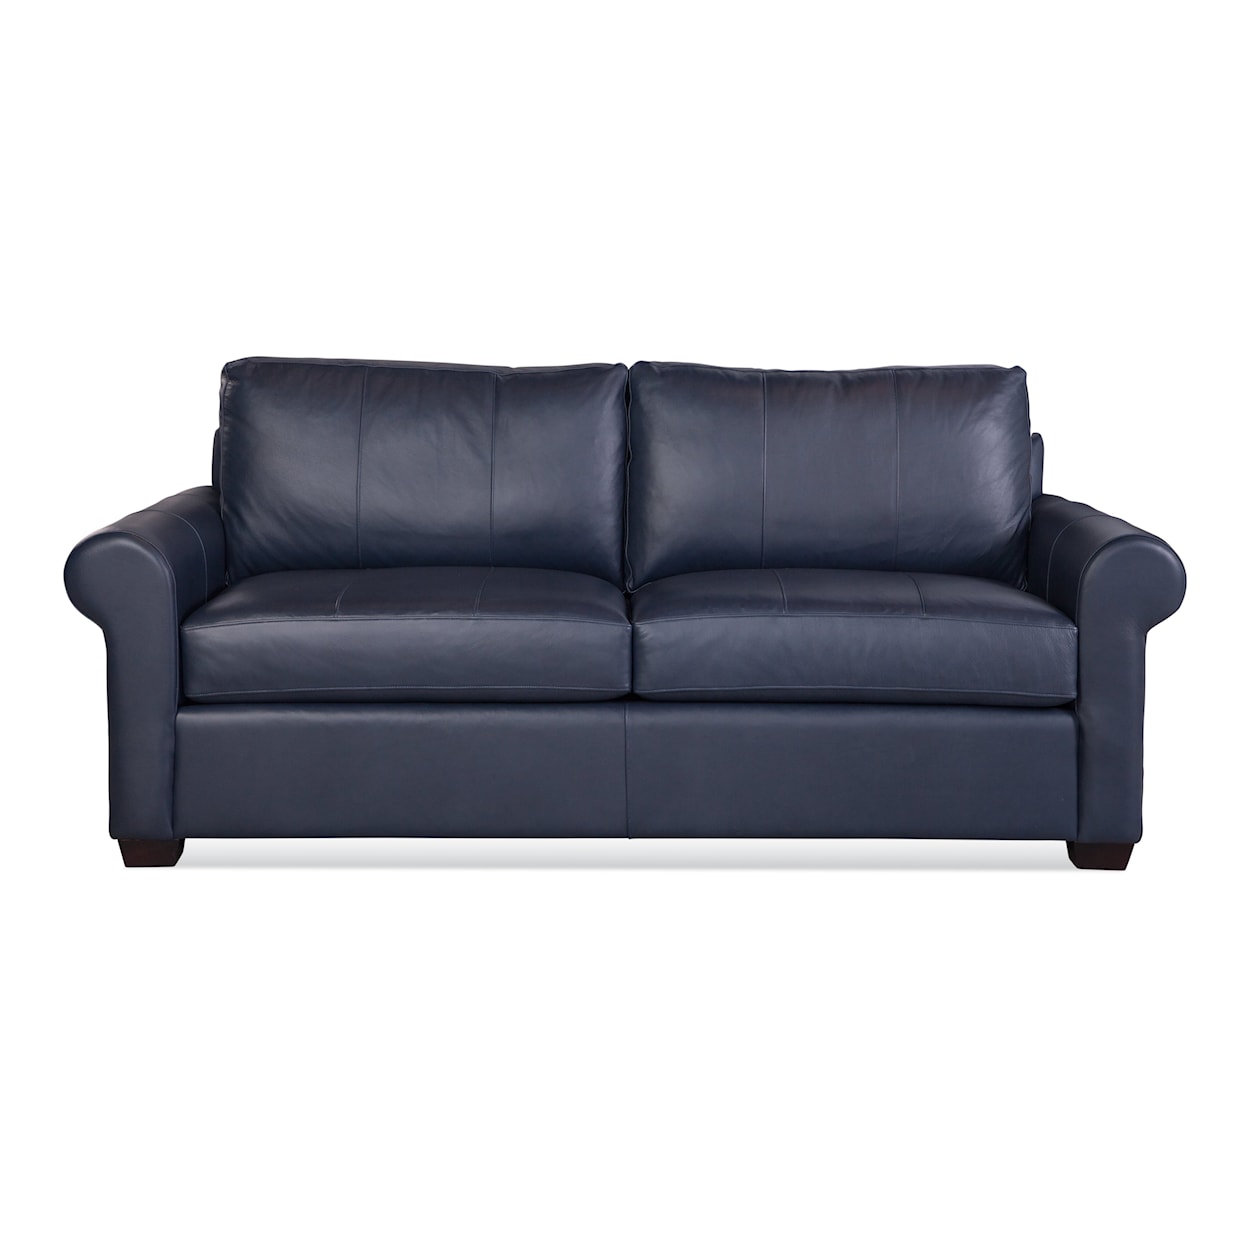 Braxton Culler Bedford Bedford 2 over 2 Leather Sofa